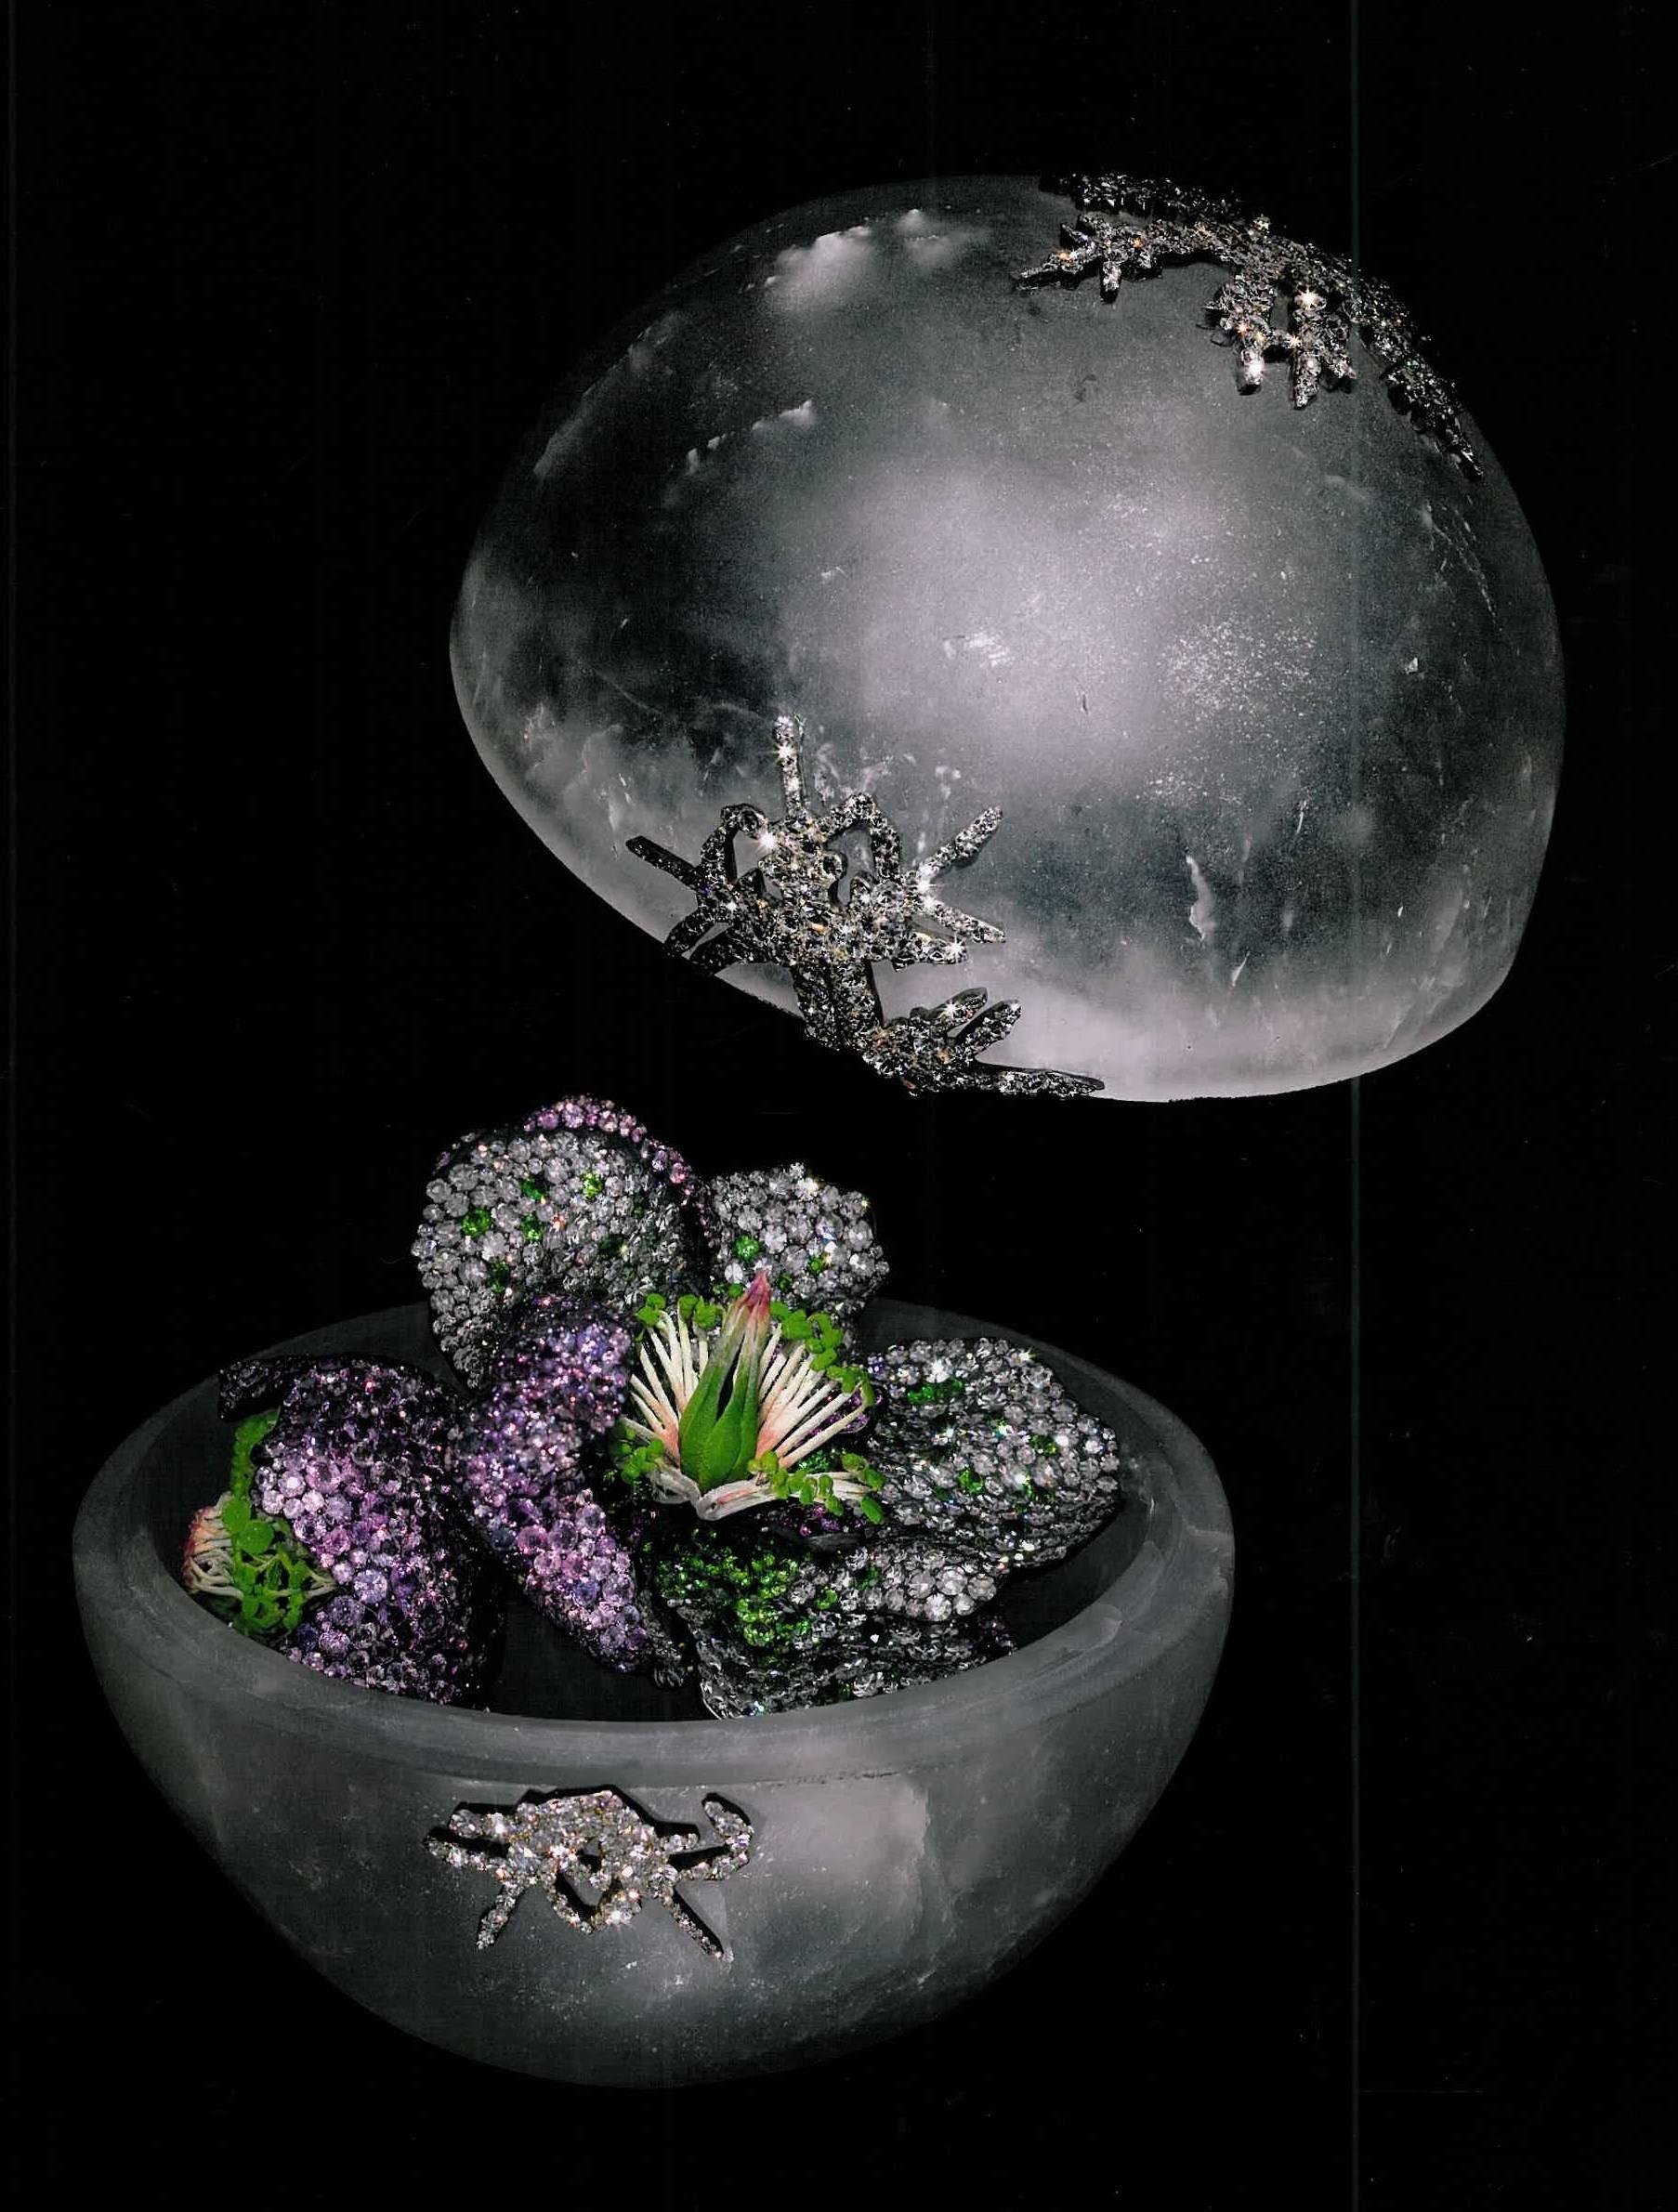 This is the second volume of work of JAR Paris - Joel Arthur Rosenthal who is one of the most important jewellers of the late 20th and 21st centuries, bringing the catalogue raisonne of his work up to date at the time of publication in 2013, which